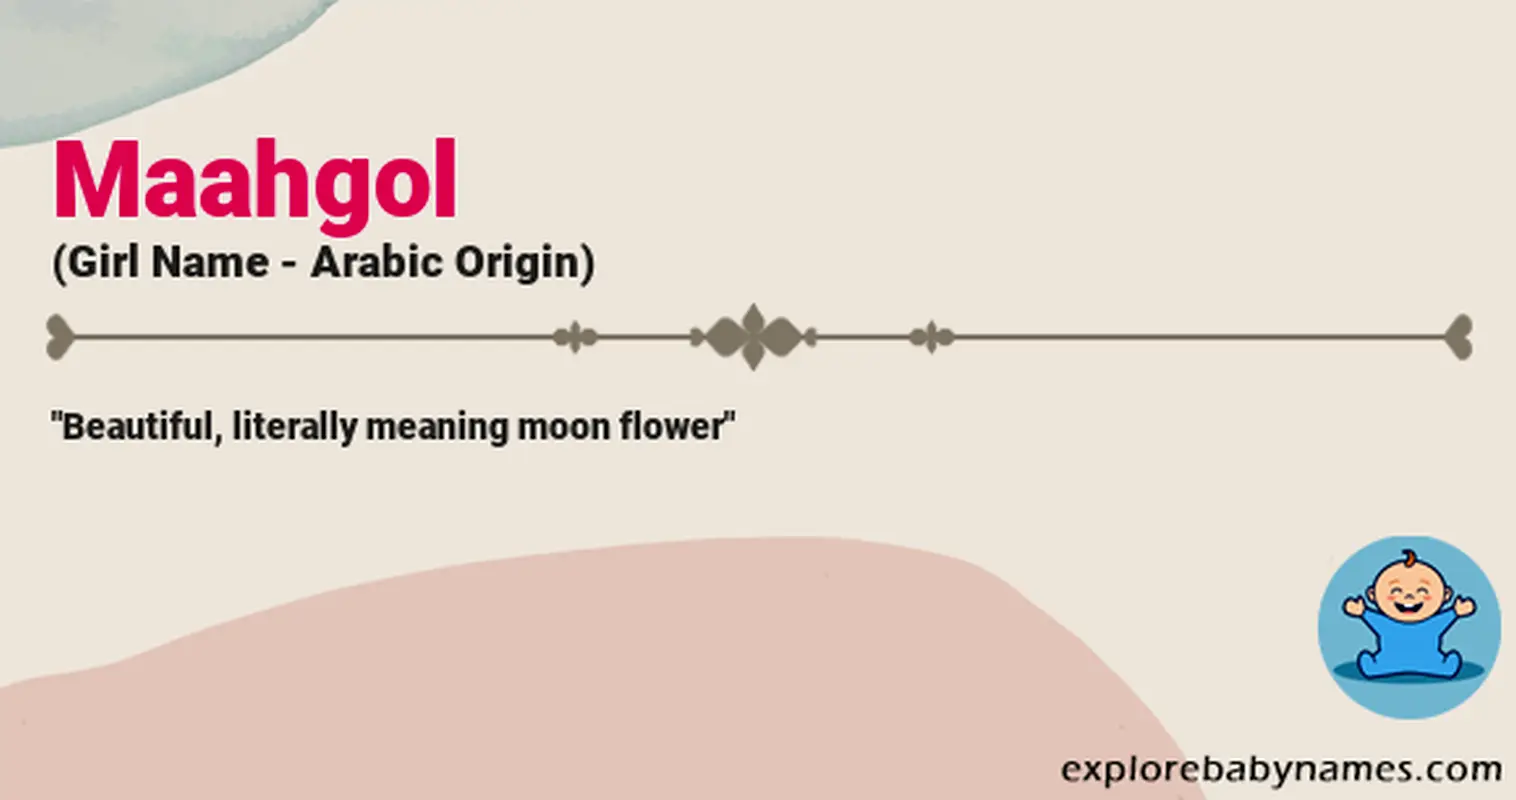 Meaning of Maahgol